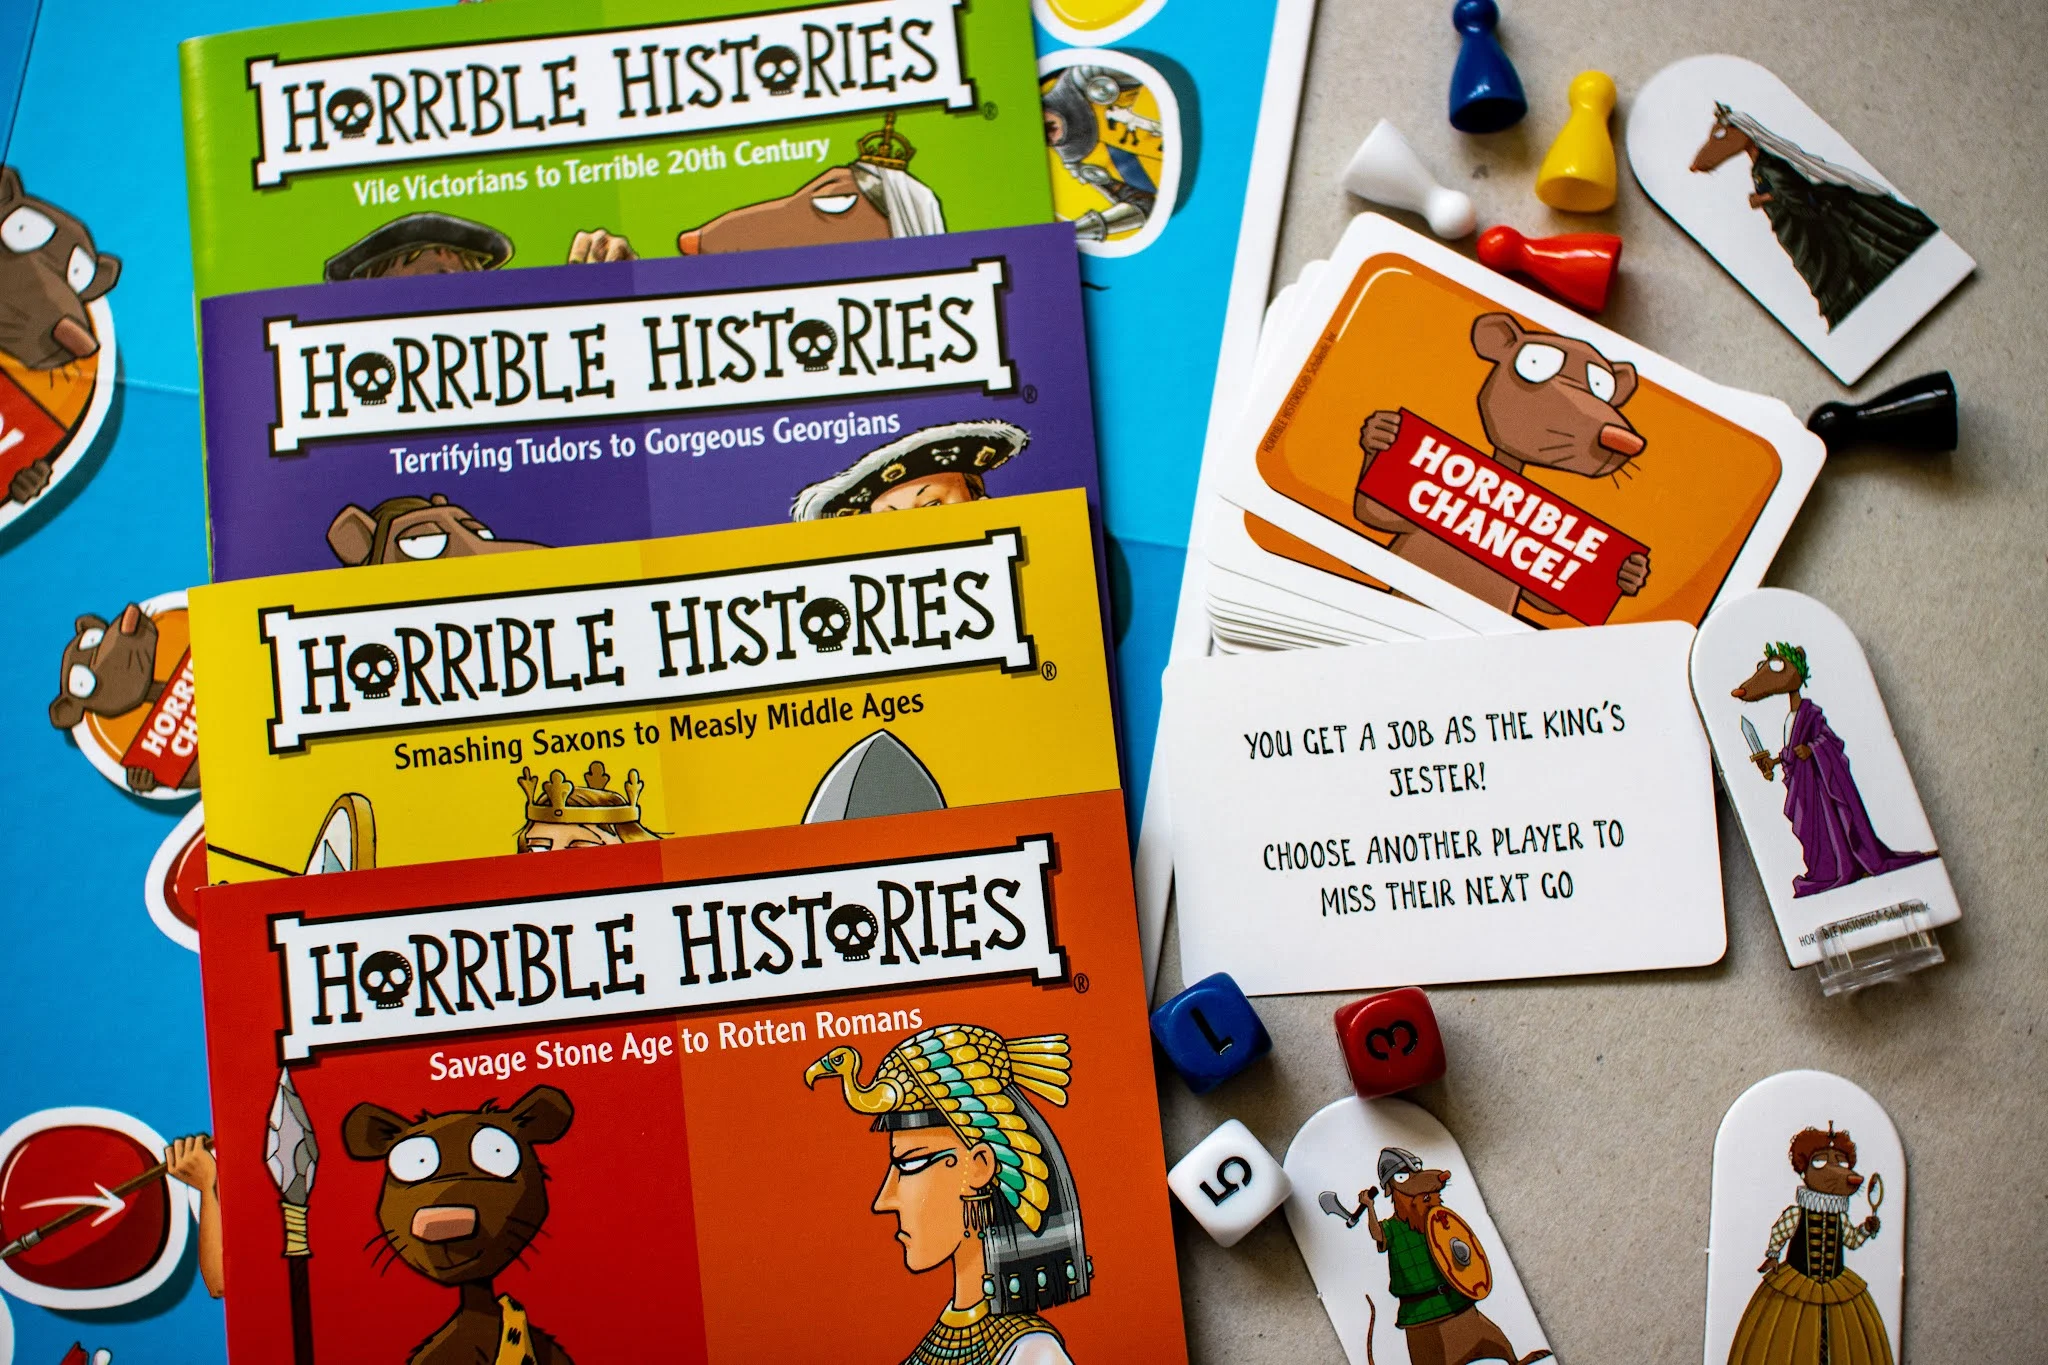 Contents of the Horrible histories board game box including board, question booklet, character pieces and dice